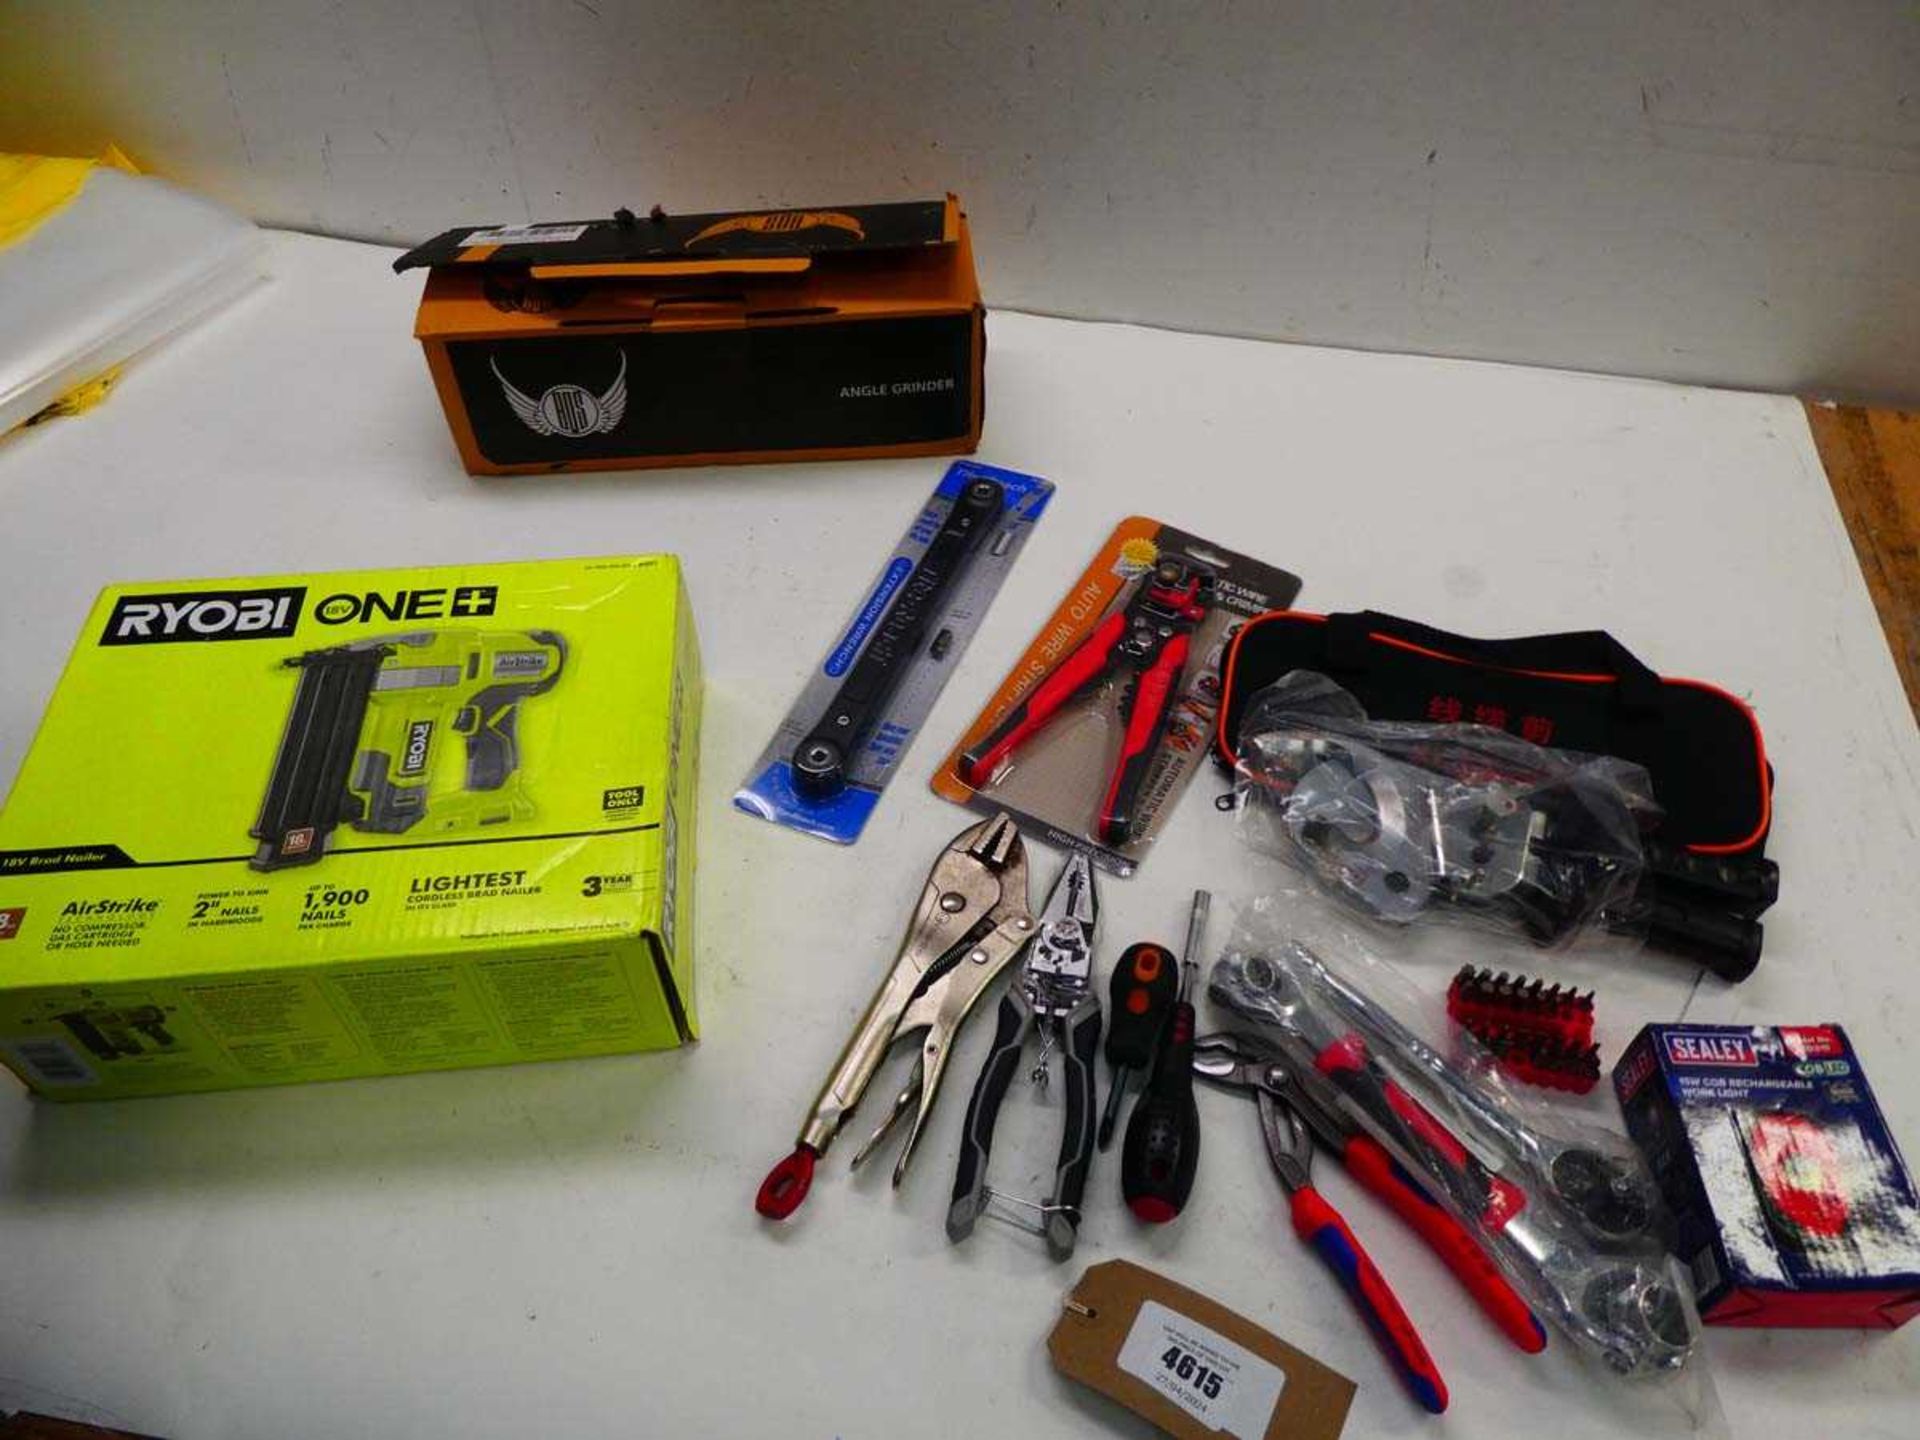 +VAT Various tools to include Ryobi 18V brad nailer, BOS angle grinder, Sealey work light, wrench,